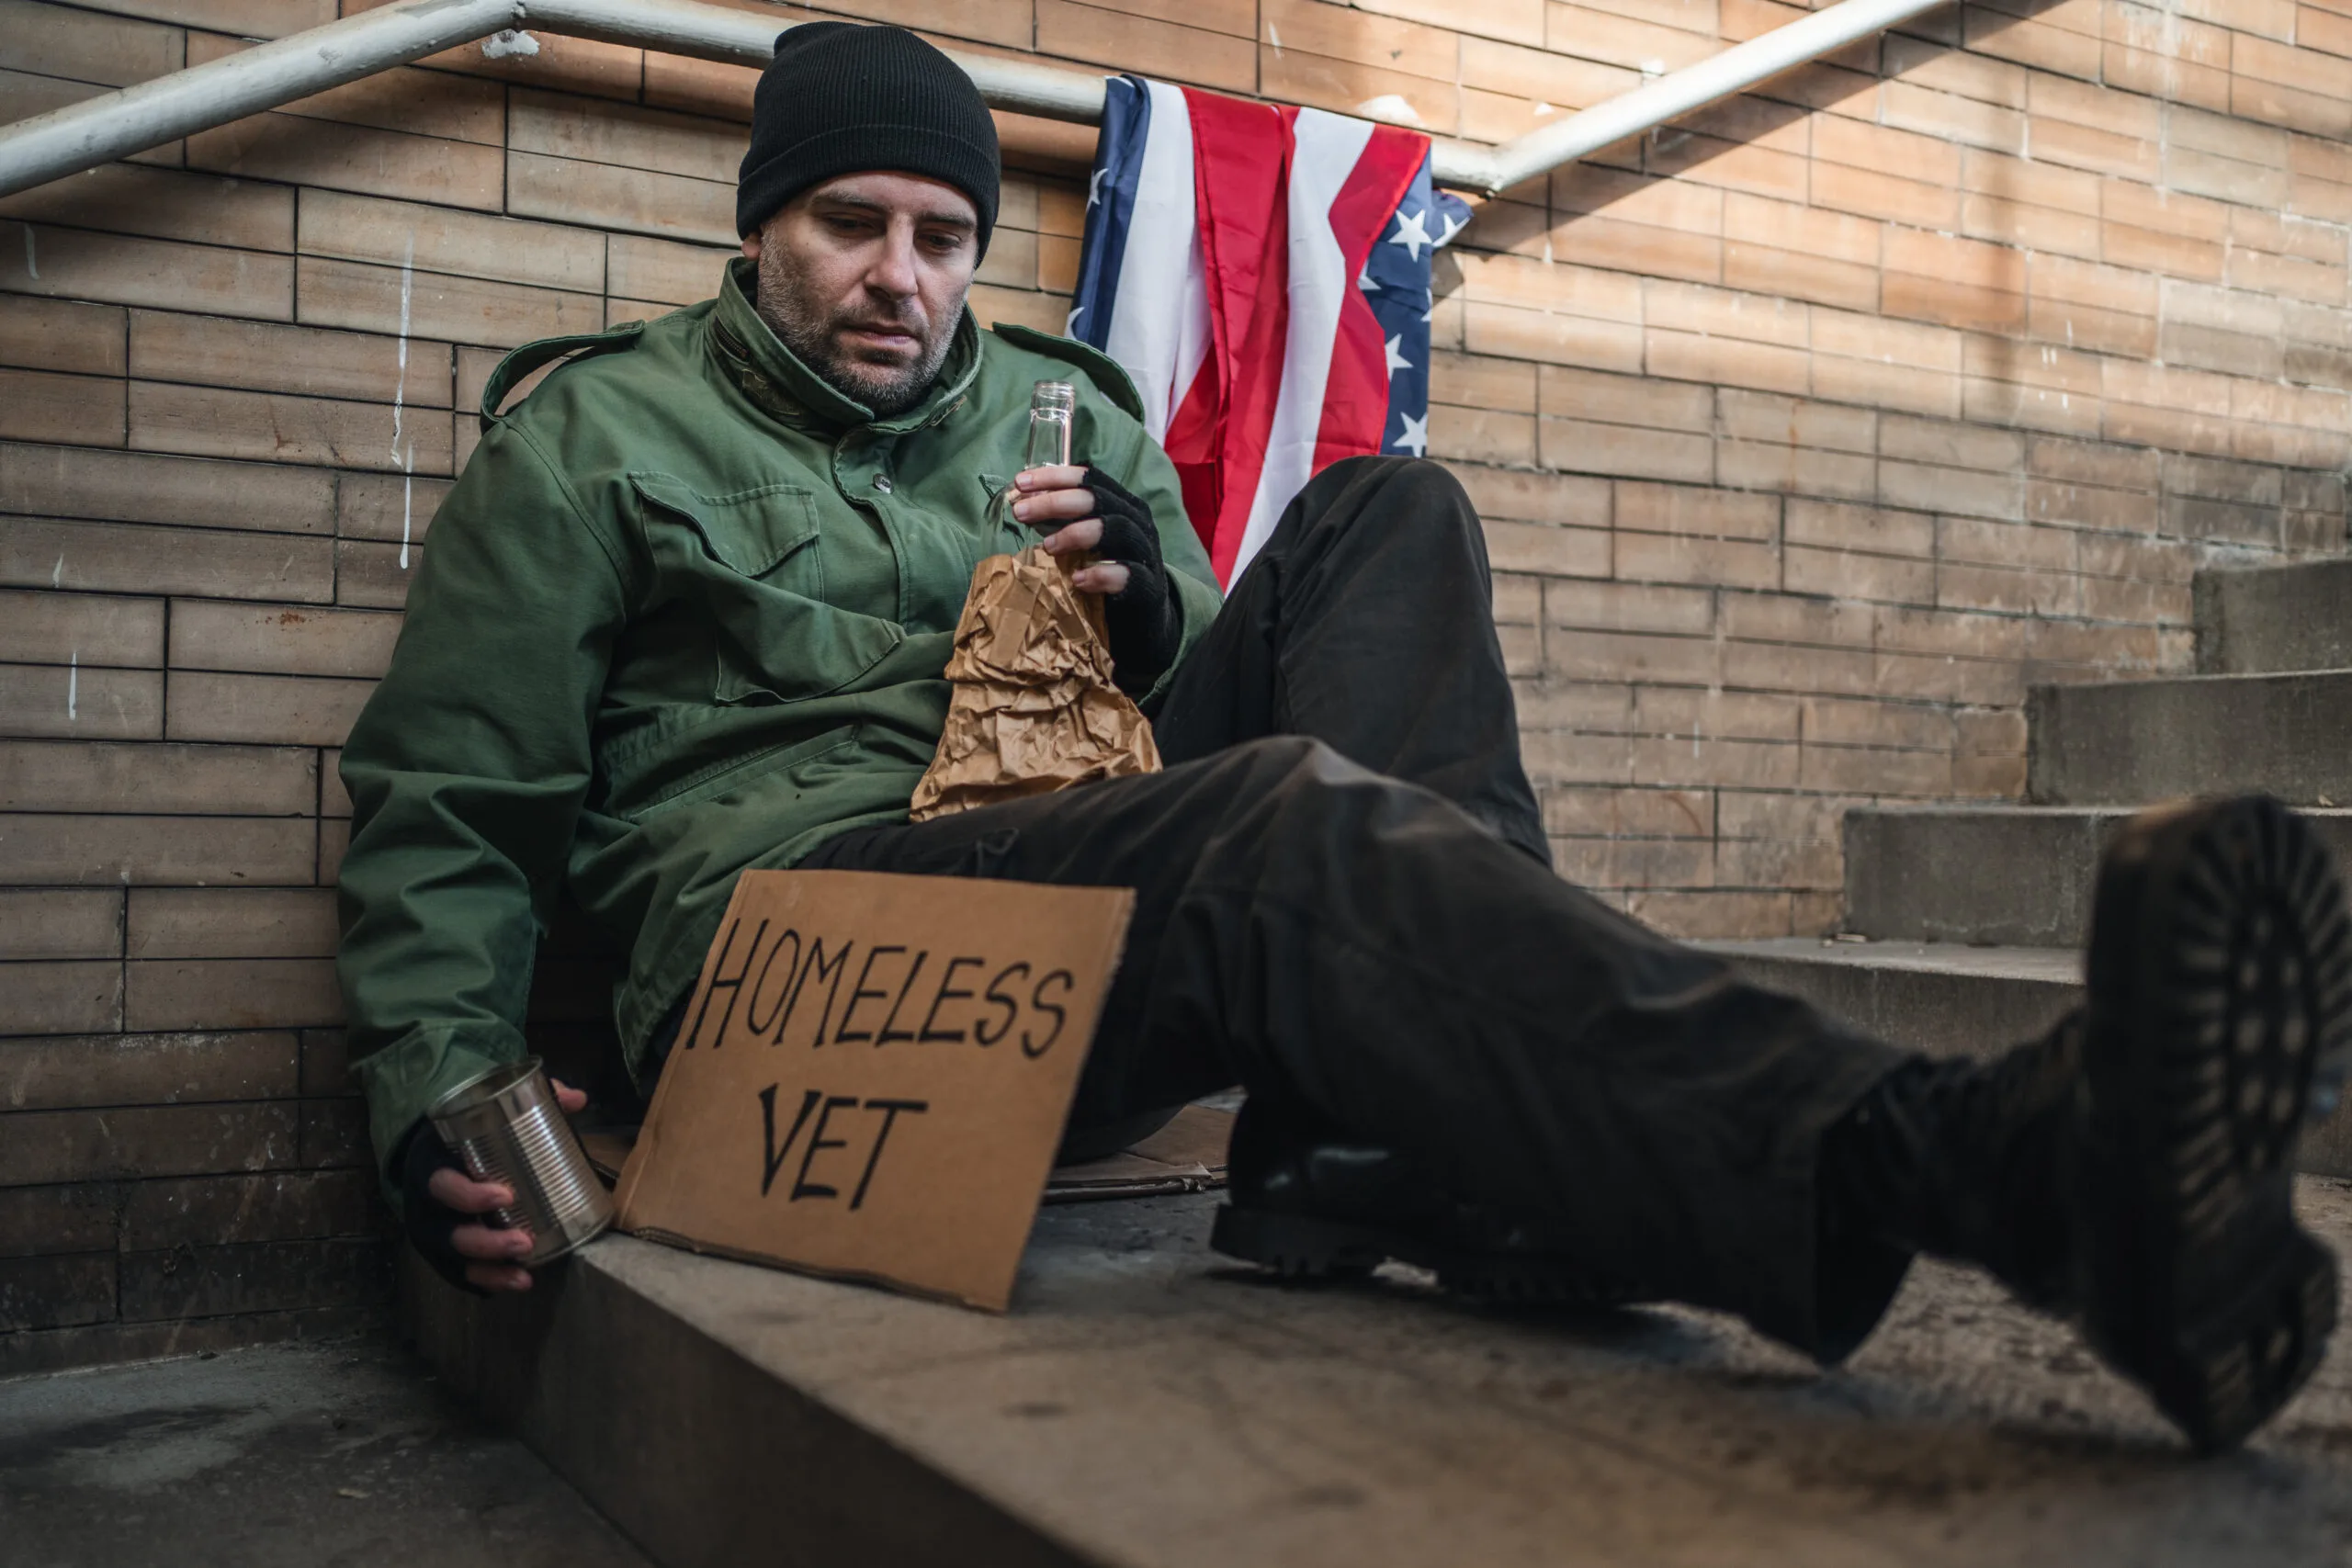 Homeless army veteran sitting on pavement begging on the street holding a placard with text Homeless vet